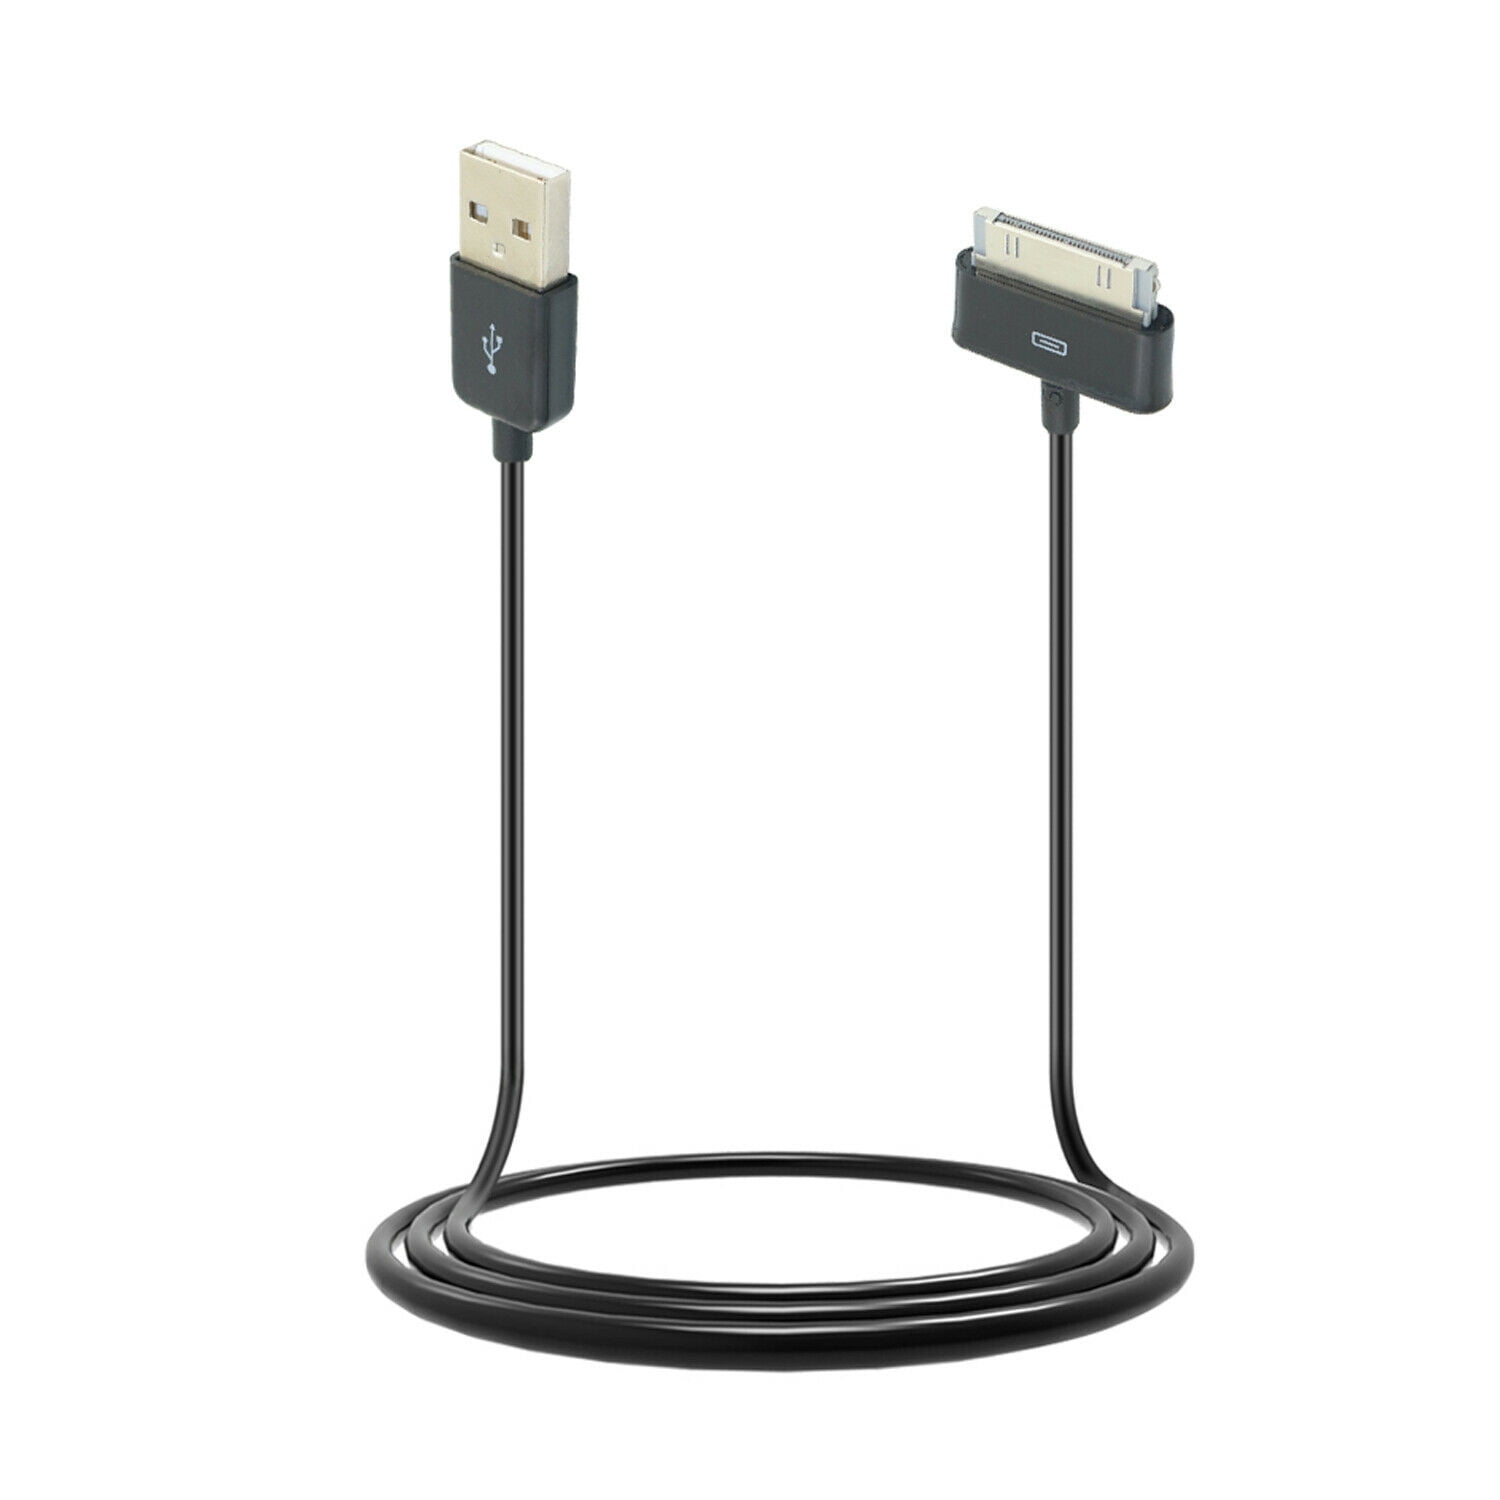 USB Data Charger Cable Cord For Samsung Galaxy Tab 2 10.1" SGH-T779 SGH-I497 